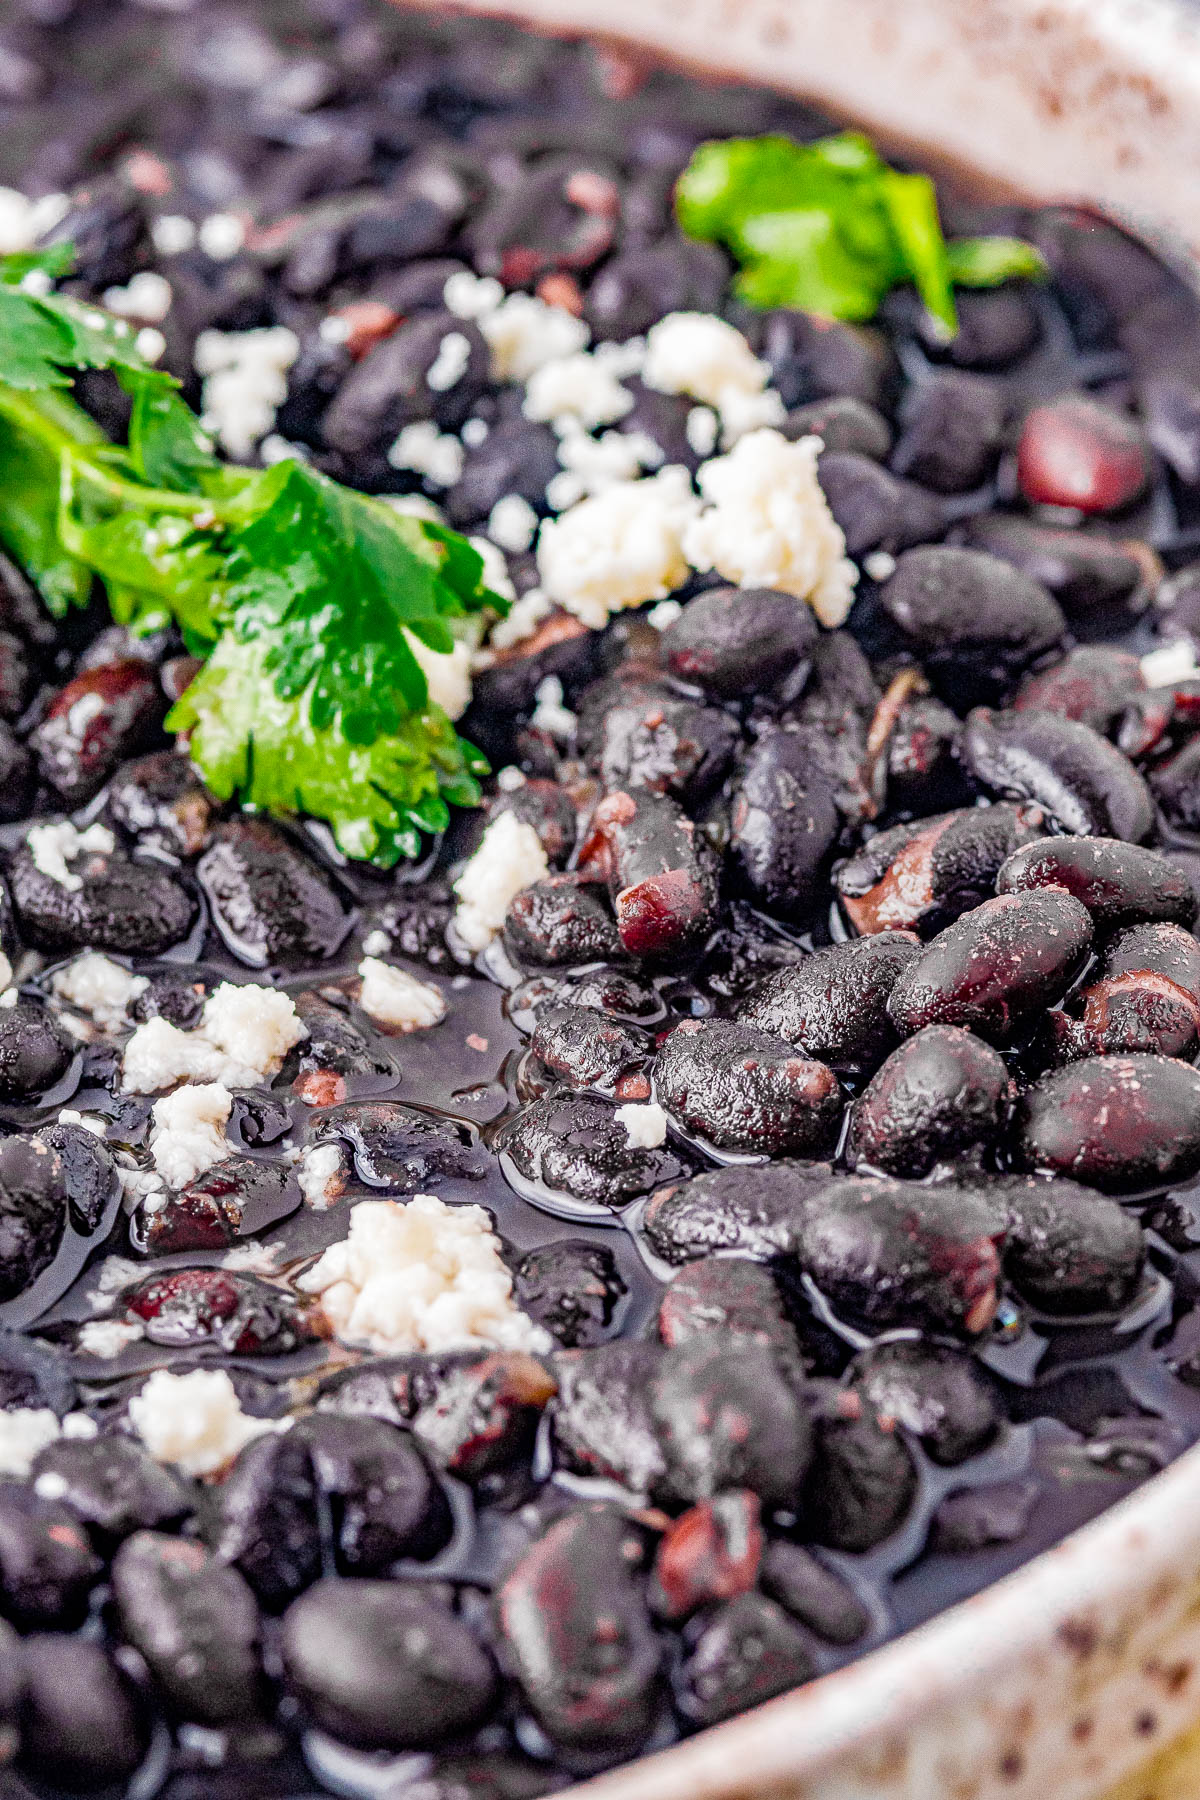 Instant Pot Black Beans – Learn how to EASILY make PERFECT black beans in an Instant Pot in just ONE hour! Substitute these superior tasting homemade black beans in any recipe that calls for canned black beans including soups, chili, casseroles, burritos, tacos, or your favorite Mexican recipes!